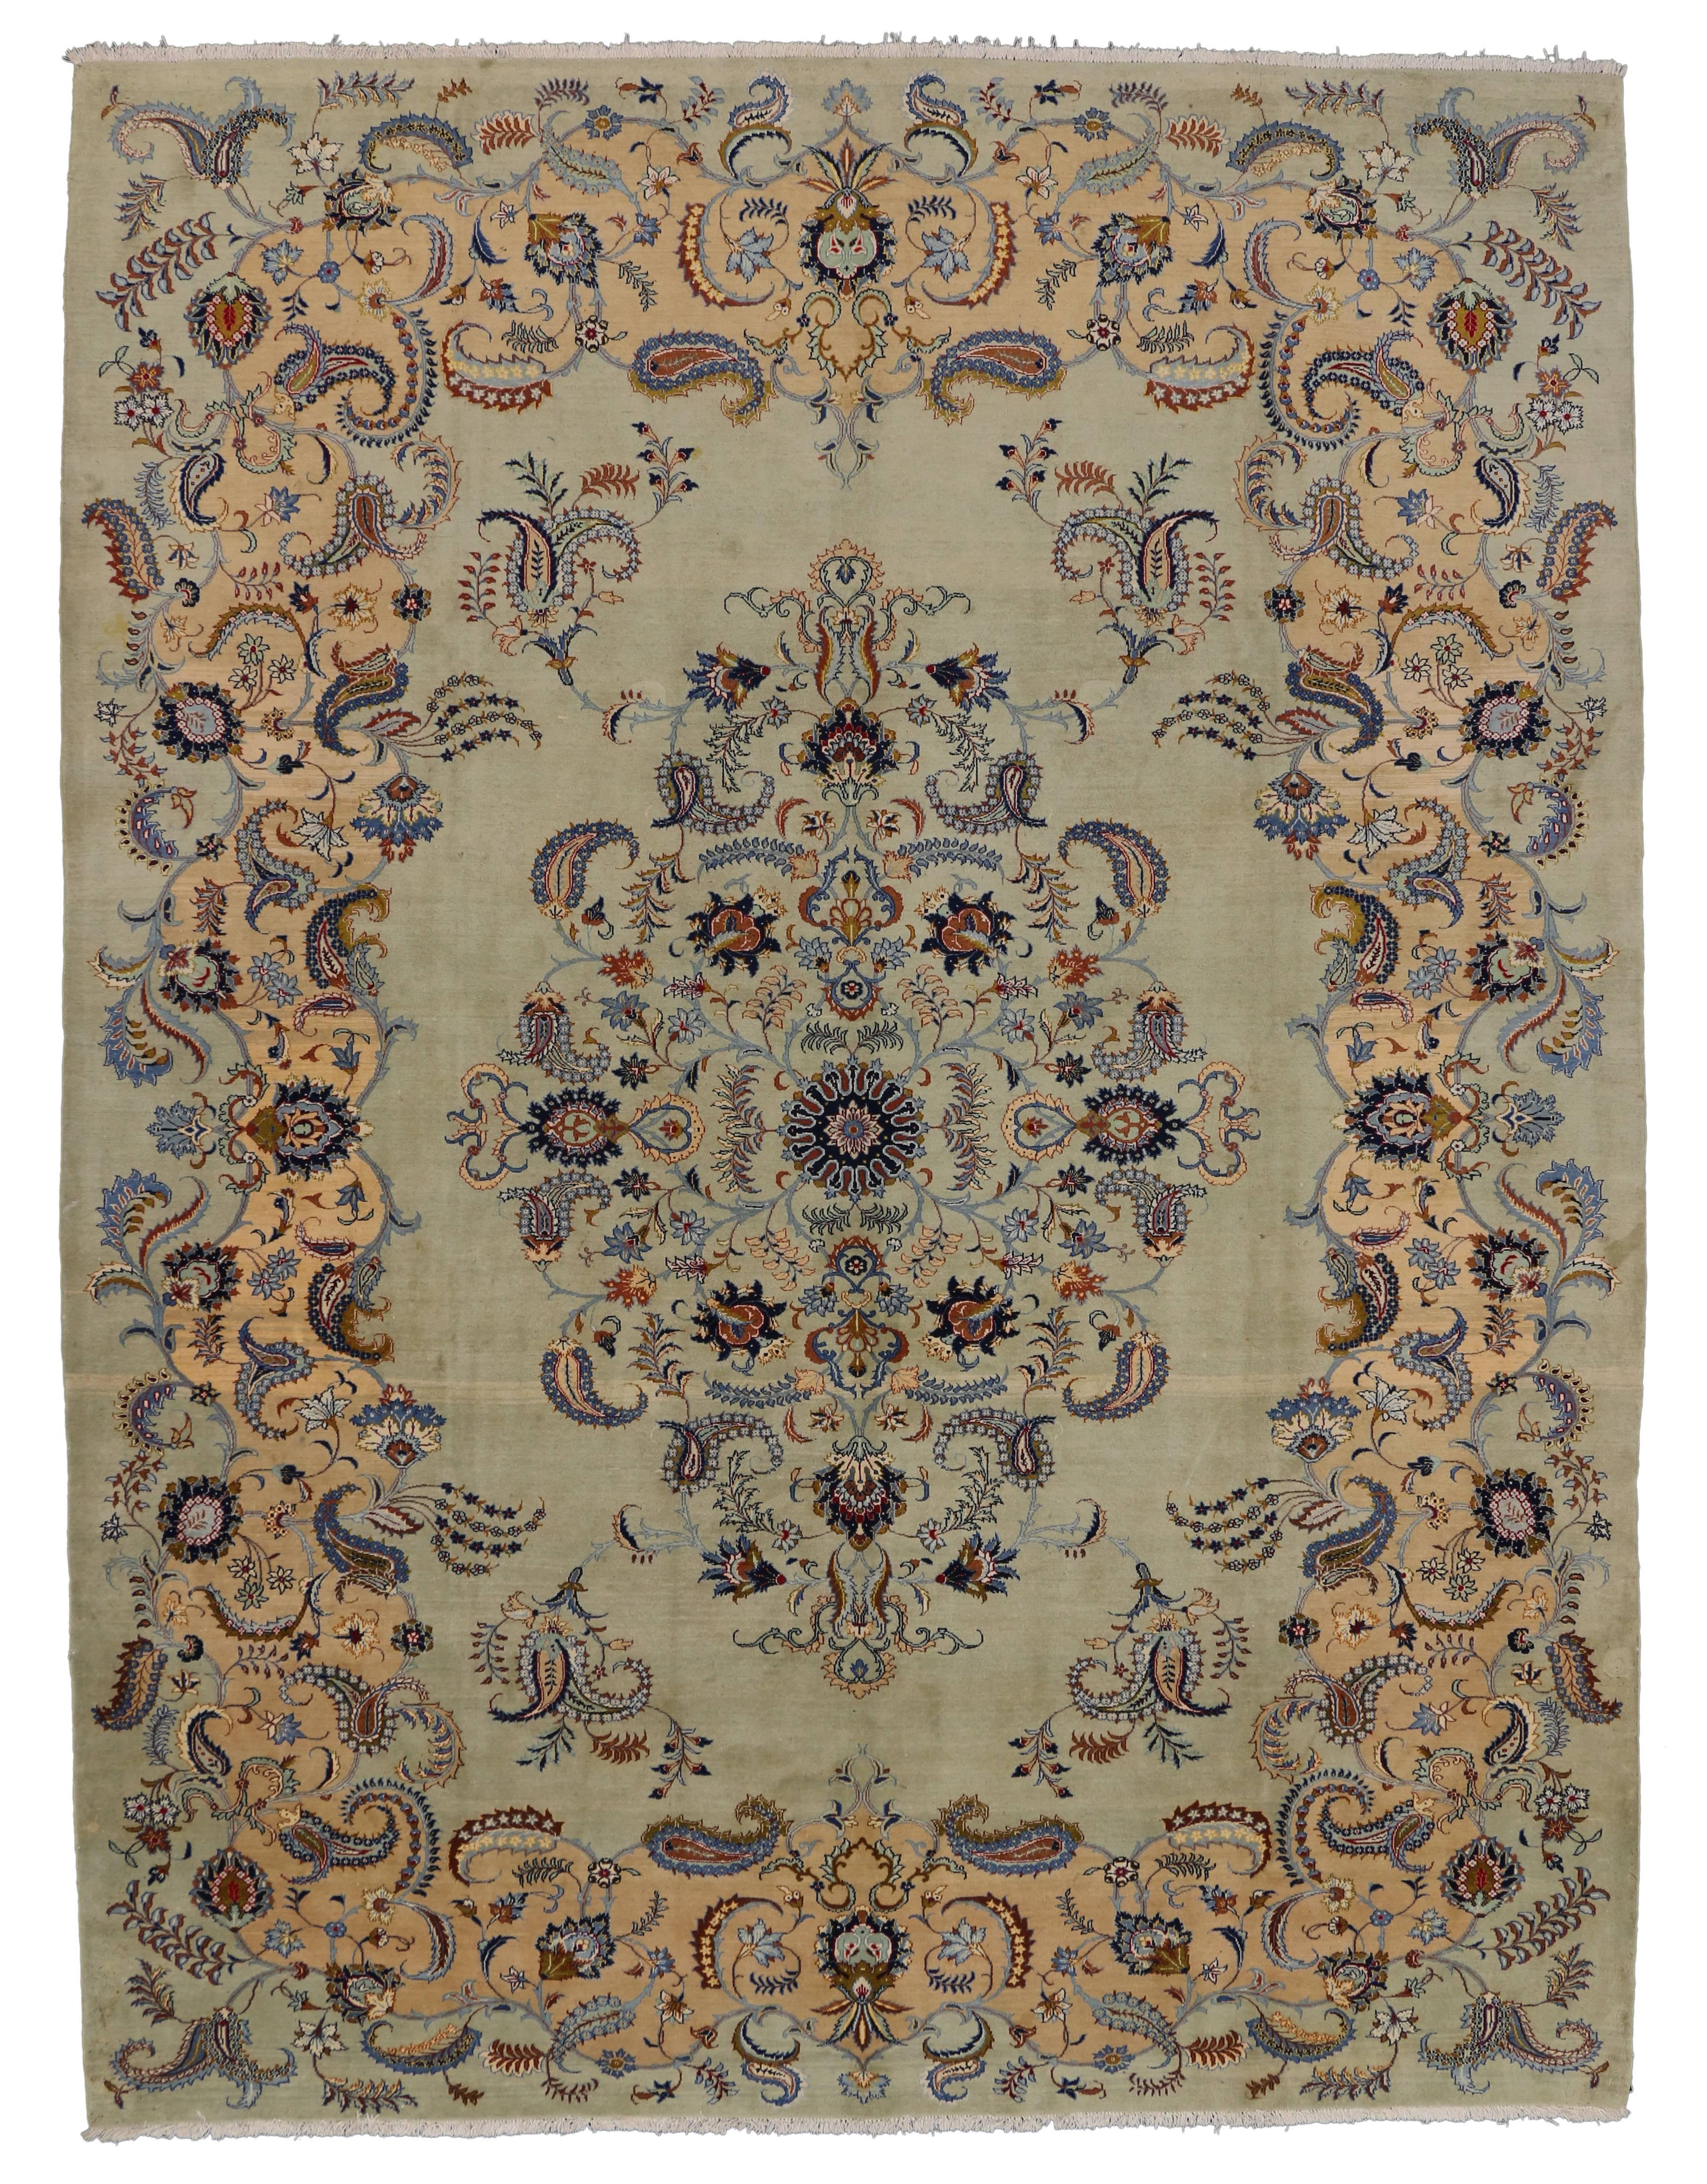 75180, pale green vintage Persian Kashan rug with traditional style. Vintage hand-knotted Persian Kashan rug featuring an ornate center floral medallion motif. Allover floral and vine scroll motifs meander through the pale green field. This vintage